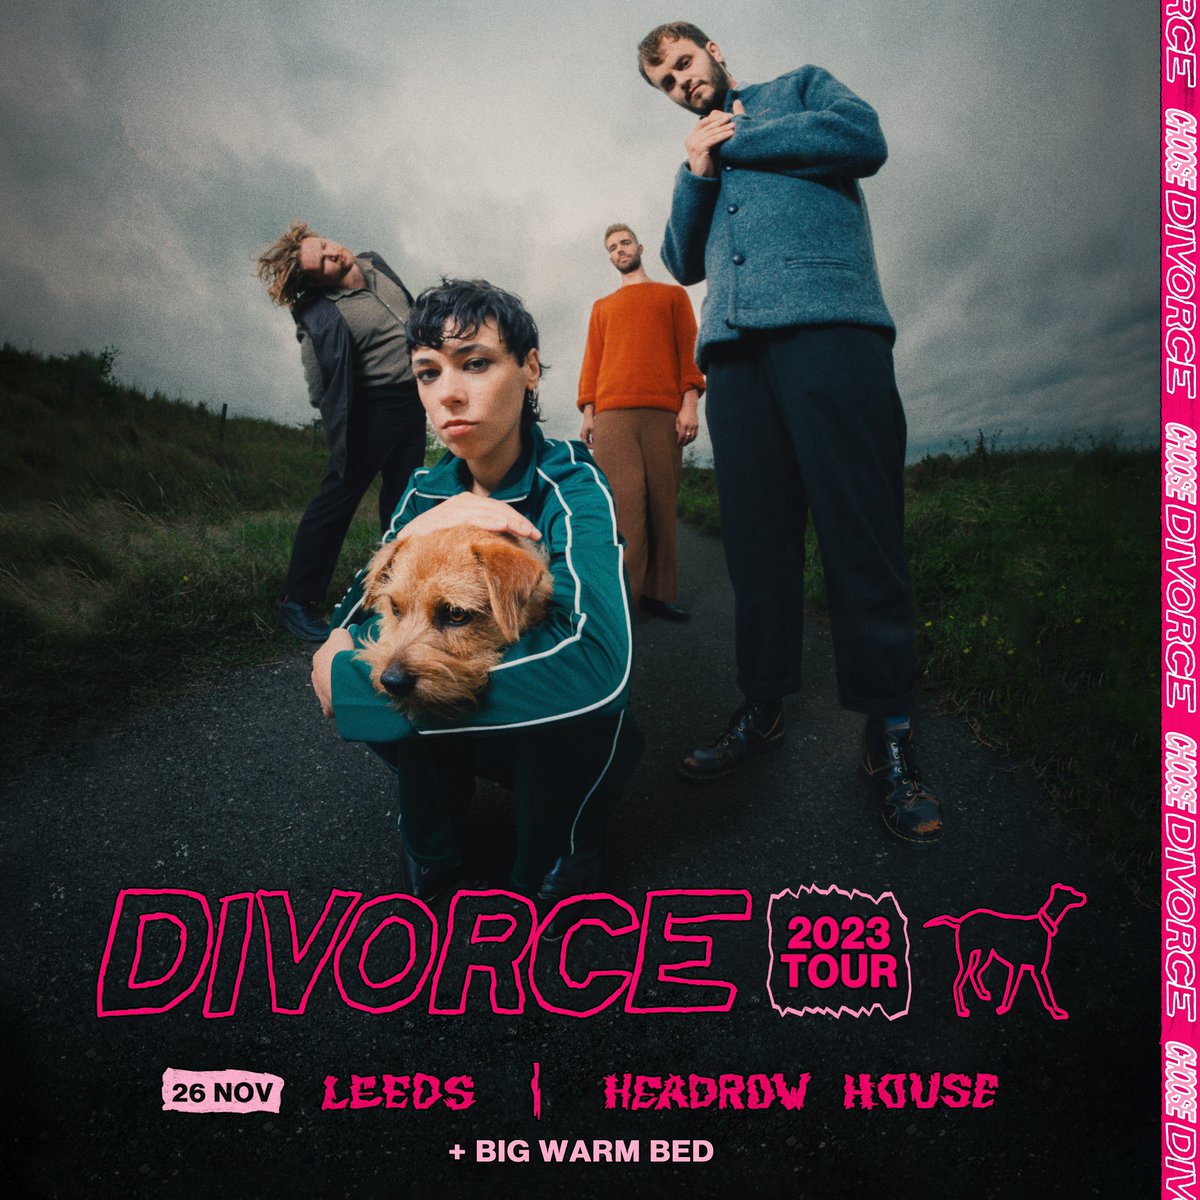 yooooooooo greetings hello and welcome. i’m playing my debut show this november supporting the unreal @divorce_hq at @headrowhouse. I can’t wait! grab your tickets here or at the link in my bio: linktr.ee/bigwarmbed